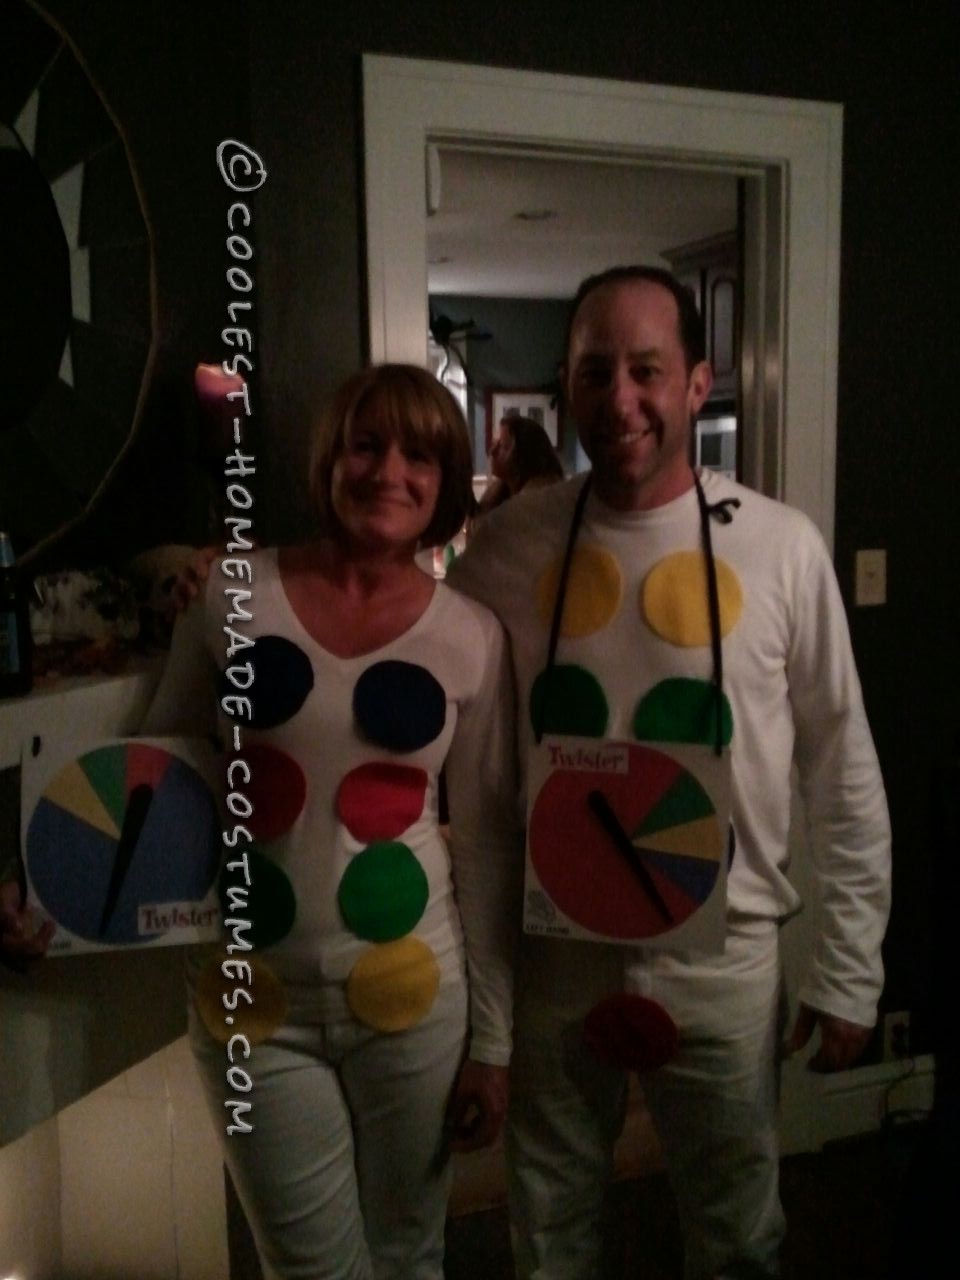 I saw the twister idea on your website originally but just for a guy.  We decided to make it a couples costume. We both wore white on top and bo